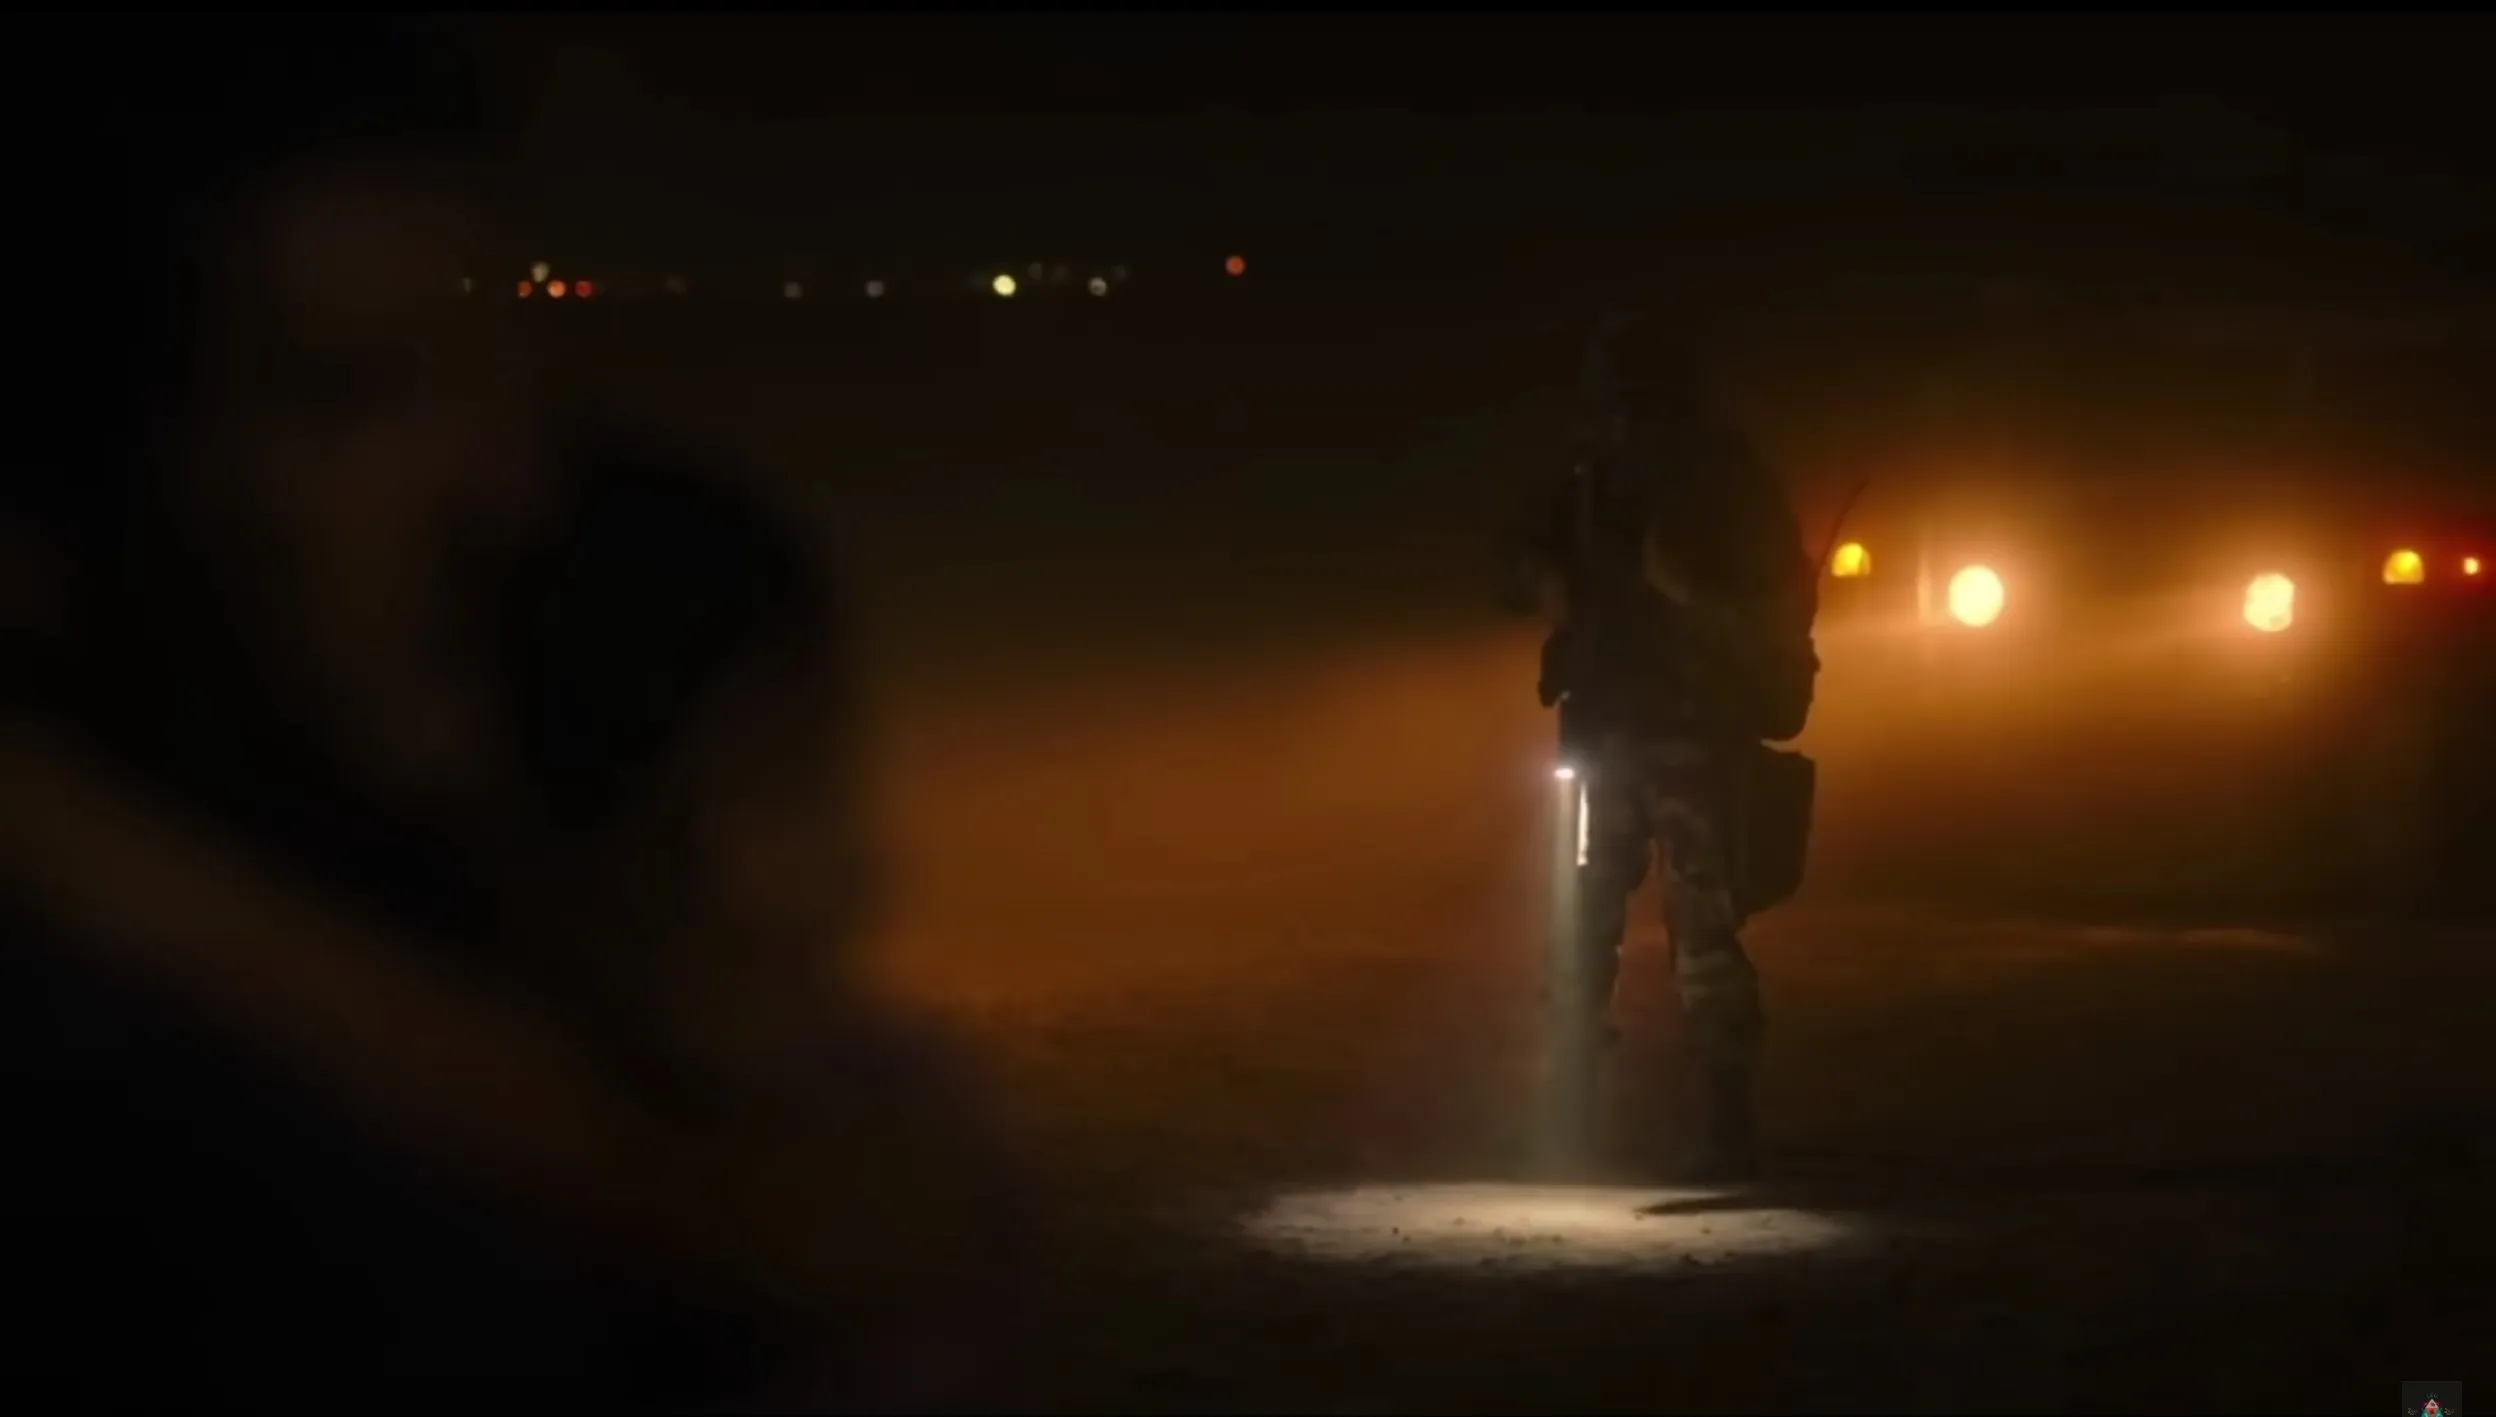 Screenshot of Craig Mazin in his uncredited role as a soldier in HBO's 'The Last of Us." The soldier is standing outside in the dark night, illuminated only by the headlights of a truck, and his own flashlight. Out of focus in the foreground, we see the silhouette of Joel (Pedro Pascal)  carrying Sarah (Nico Parker). 